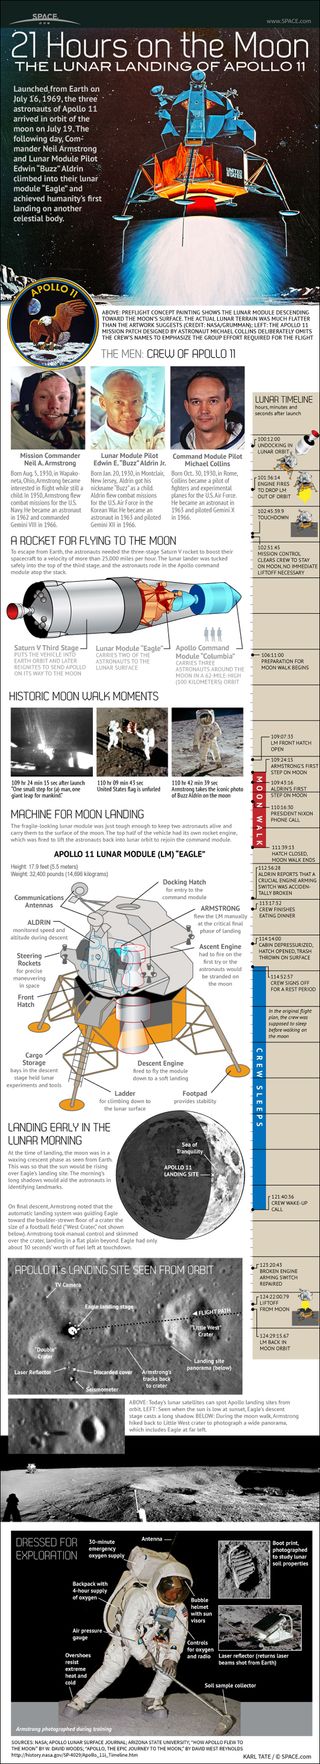 NASA's Apollo 11 mission landed the first astronauts on the moon on July 20, 1969. See how it worked.